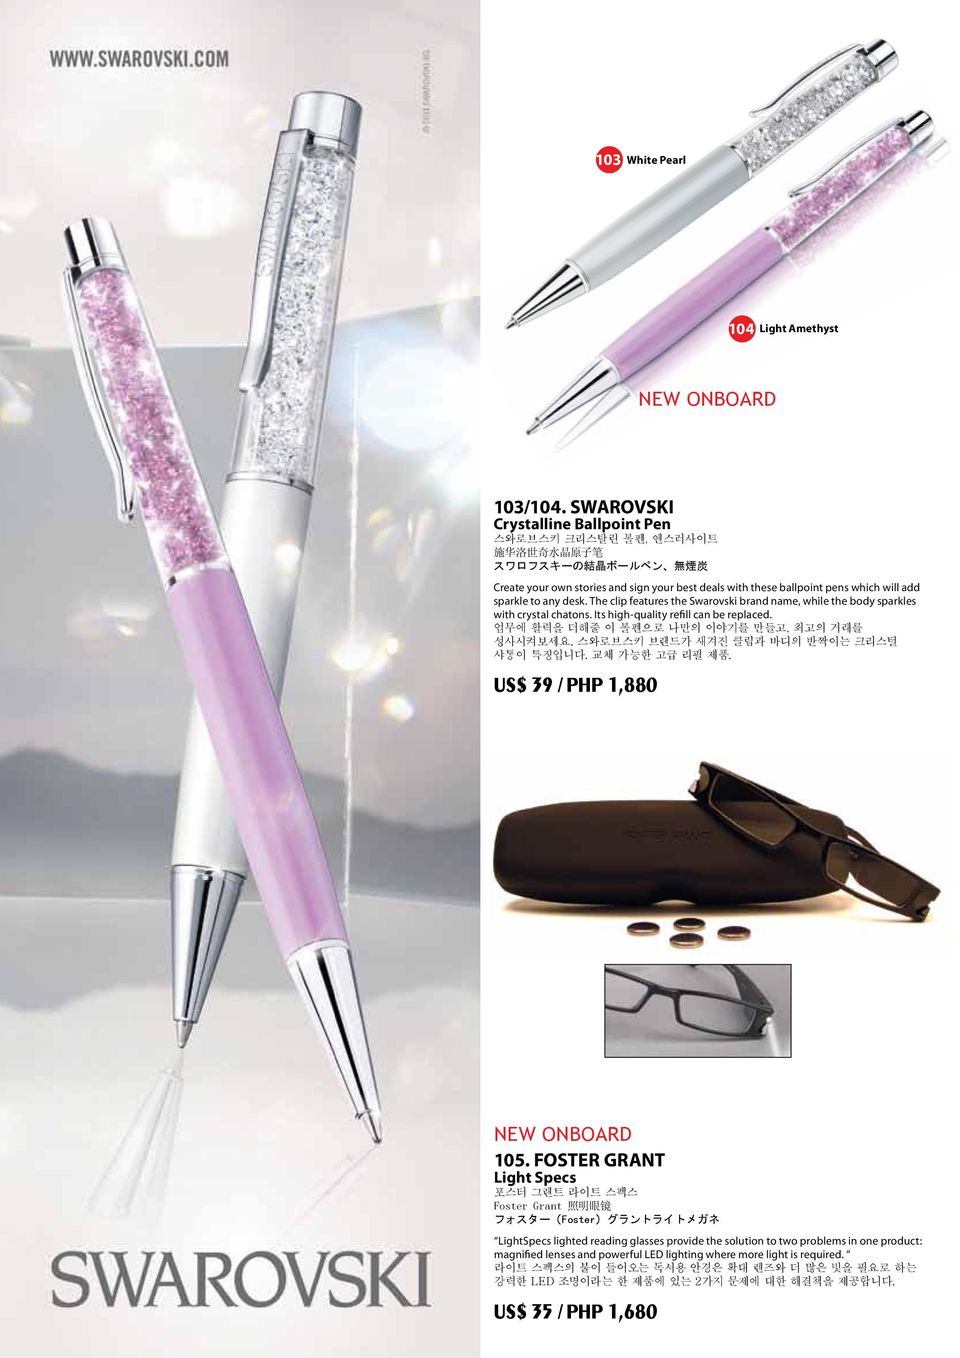 sparkle to any desk. The clip features the Swarovski brand name, while the body sparkles with crystal chatons. Its high-quality refill can be replaced.